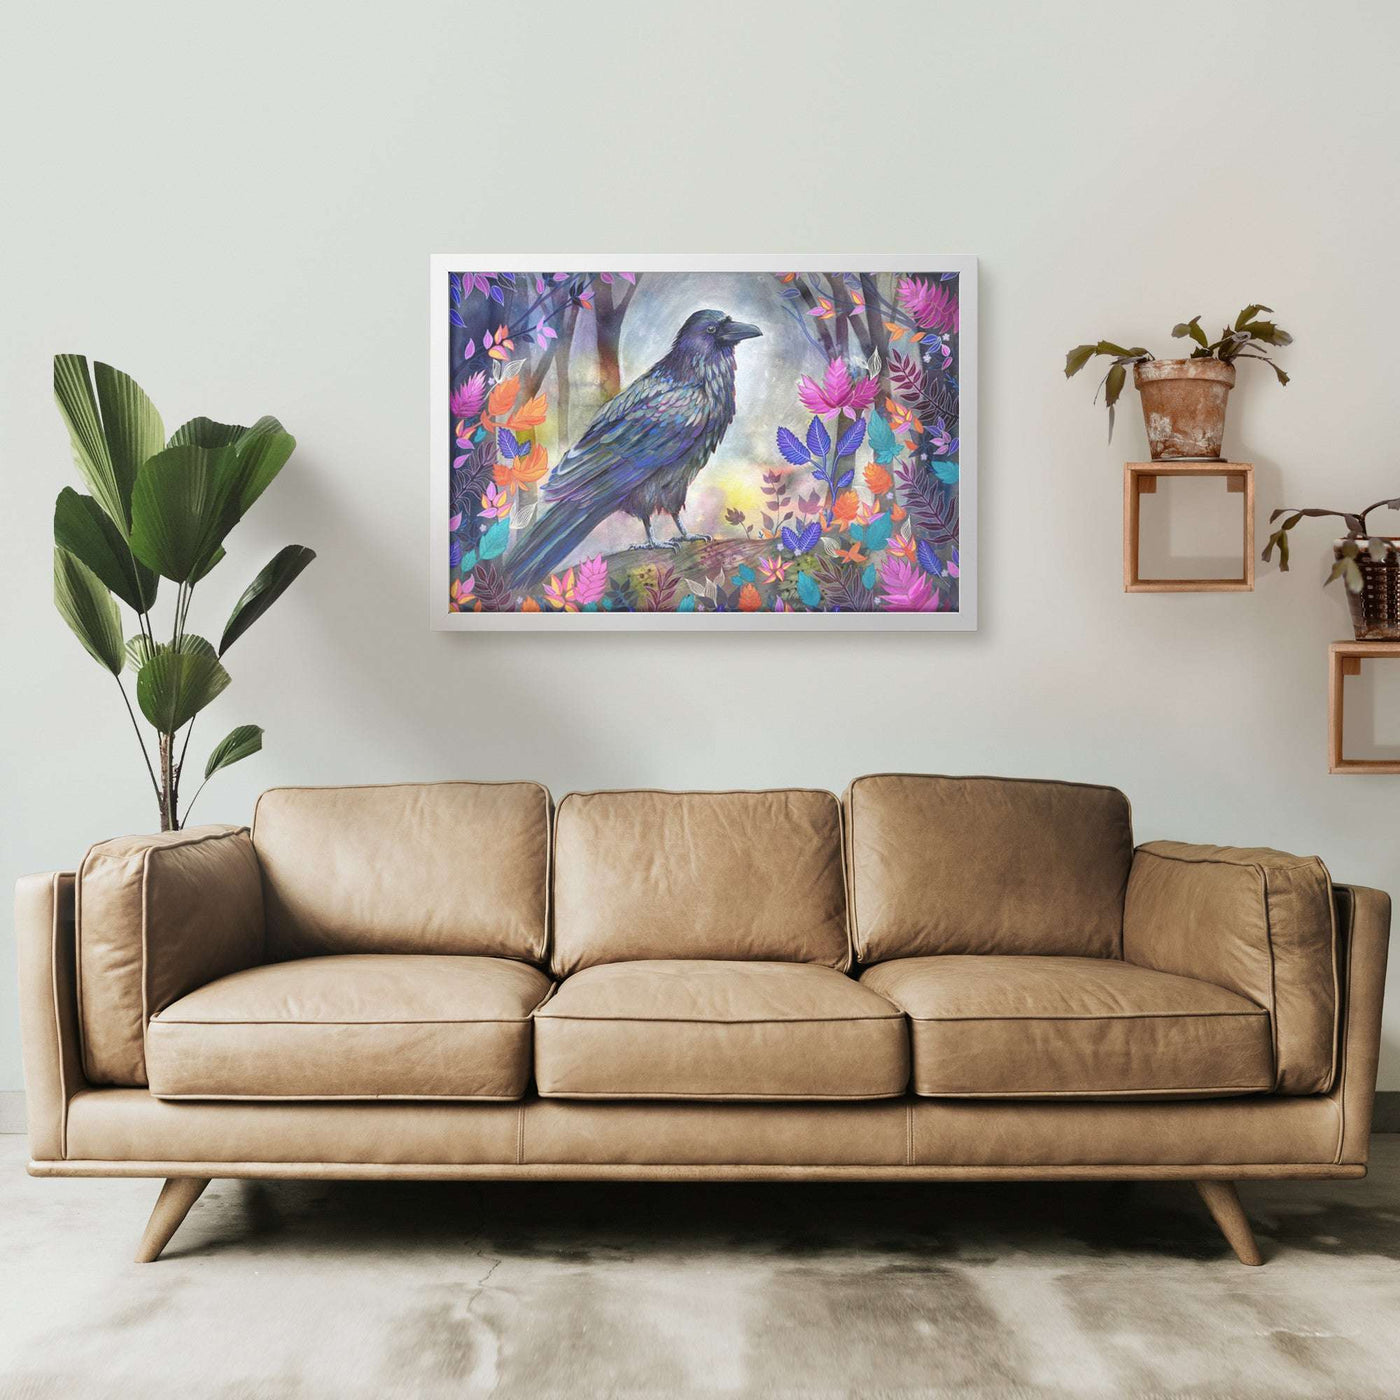 A modern living room wall, decorated with a colorful Framed Raven Art Print surrounded by vibrant flowers.